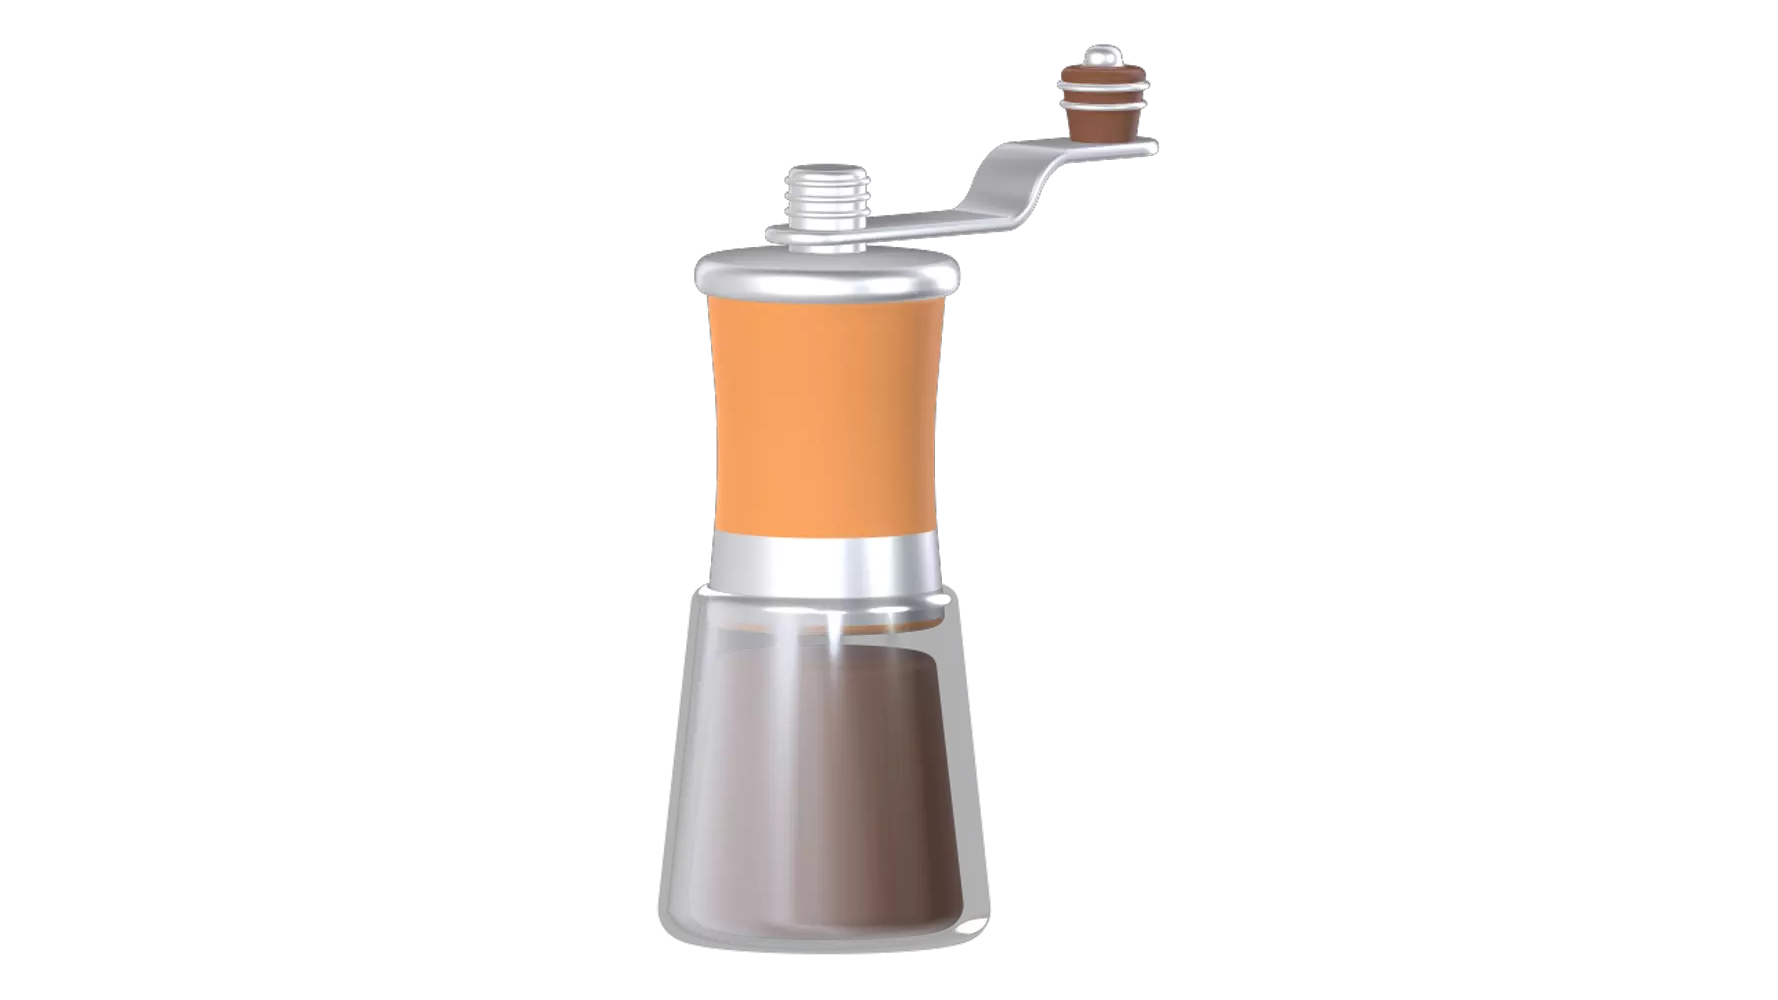 Hand Coffee Grinder 3D Graphic